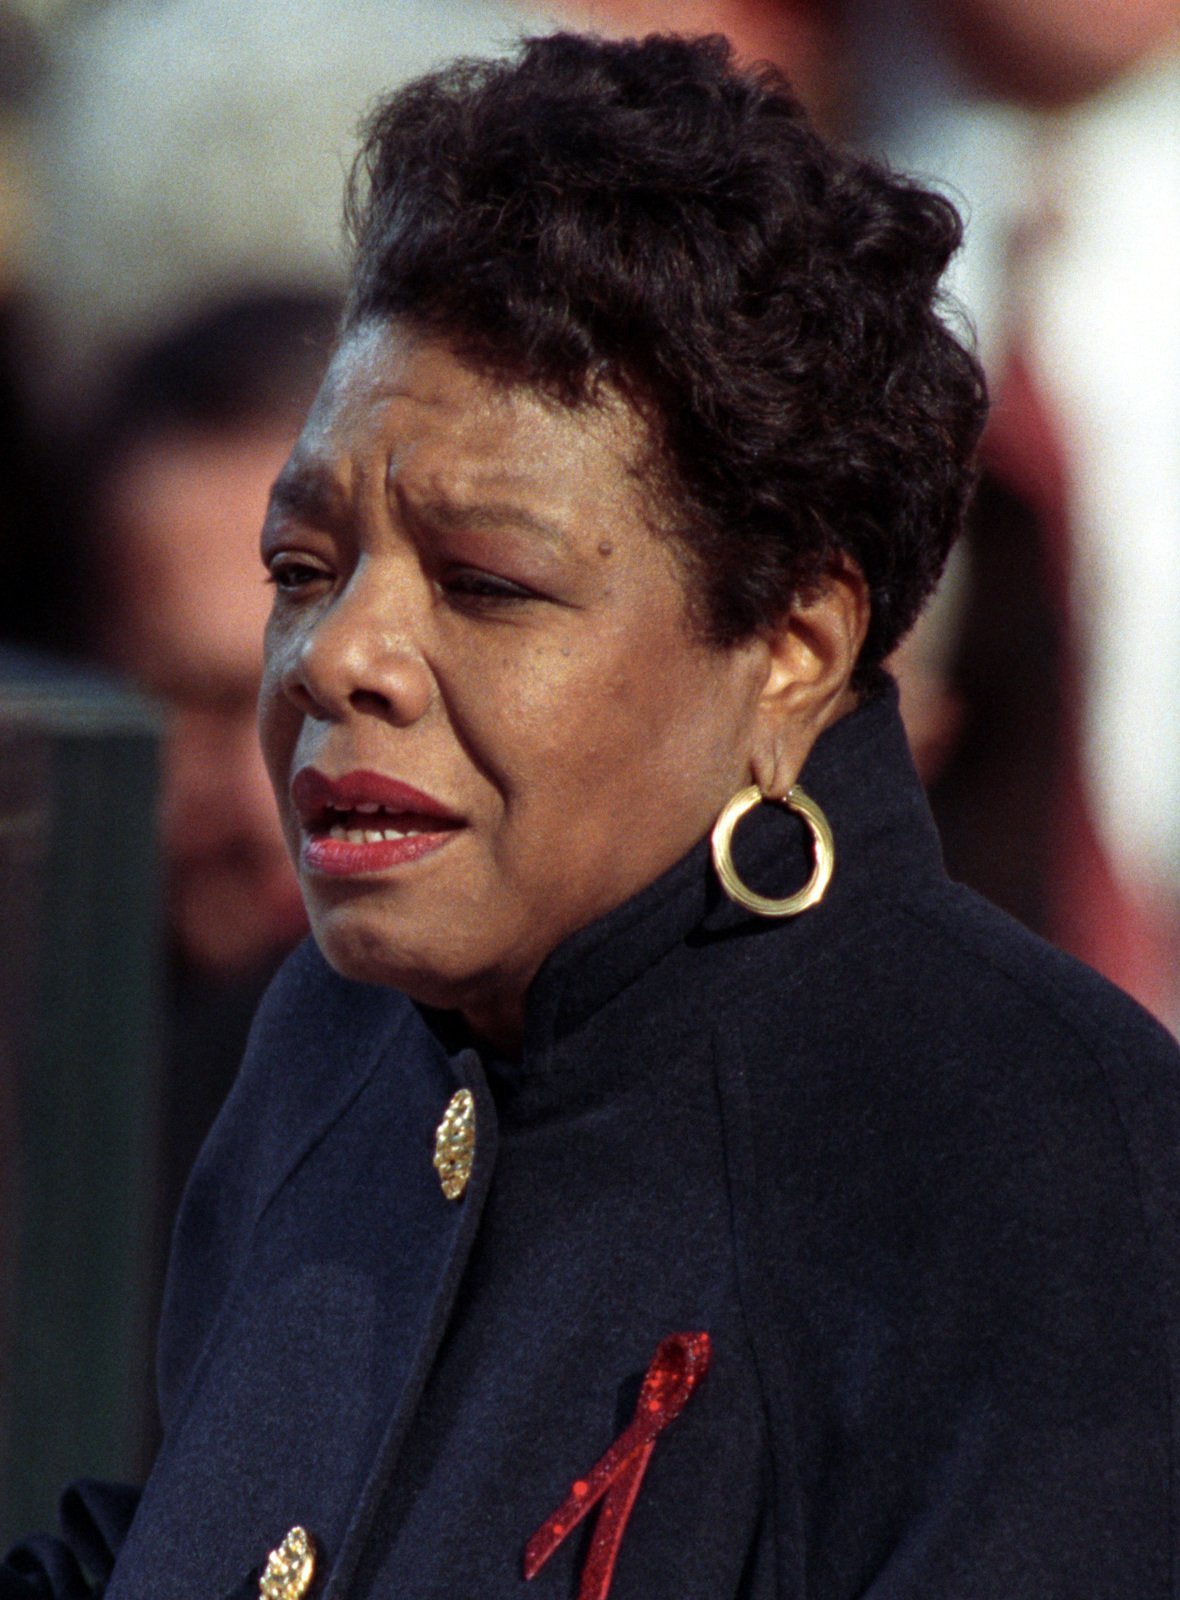 Angelou reciting her poem "On the Pulse of Morning" at US President Bill Clinton's inauguration, January 20, 1993. | Source: Wikimedia Commons Images